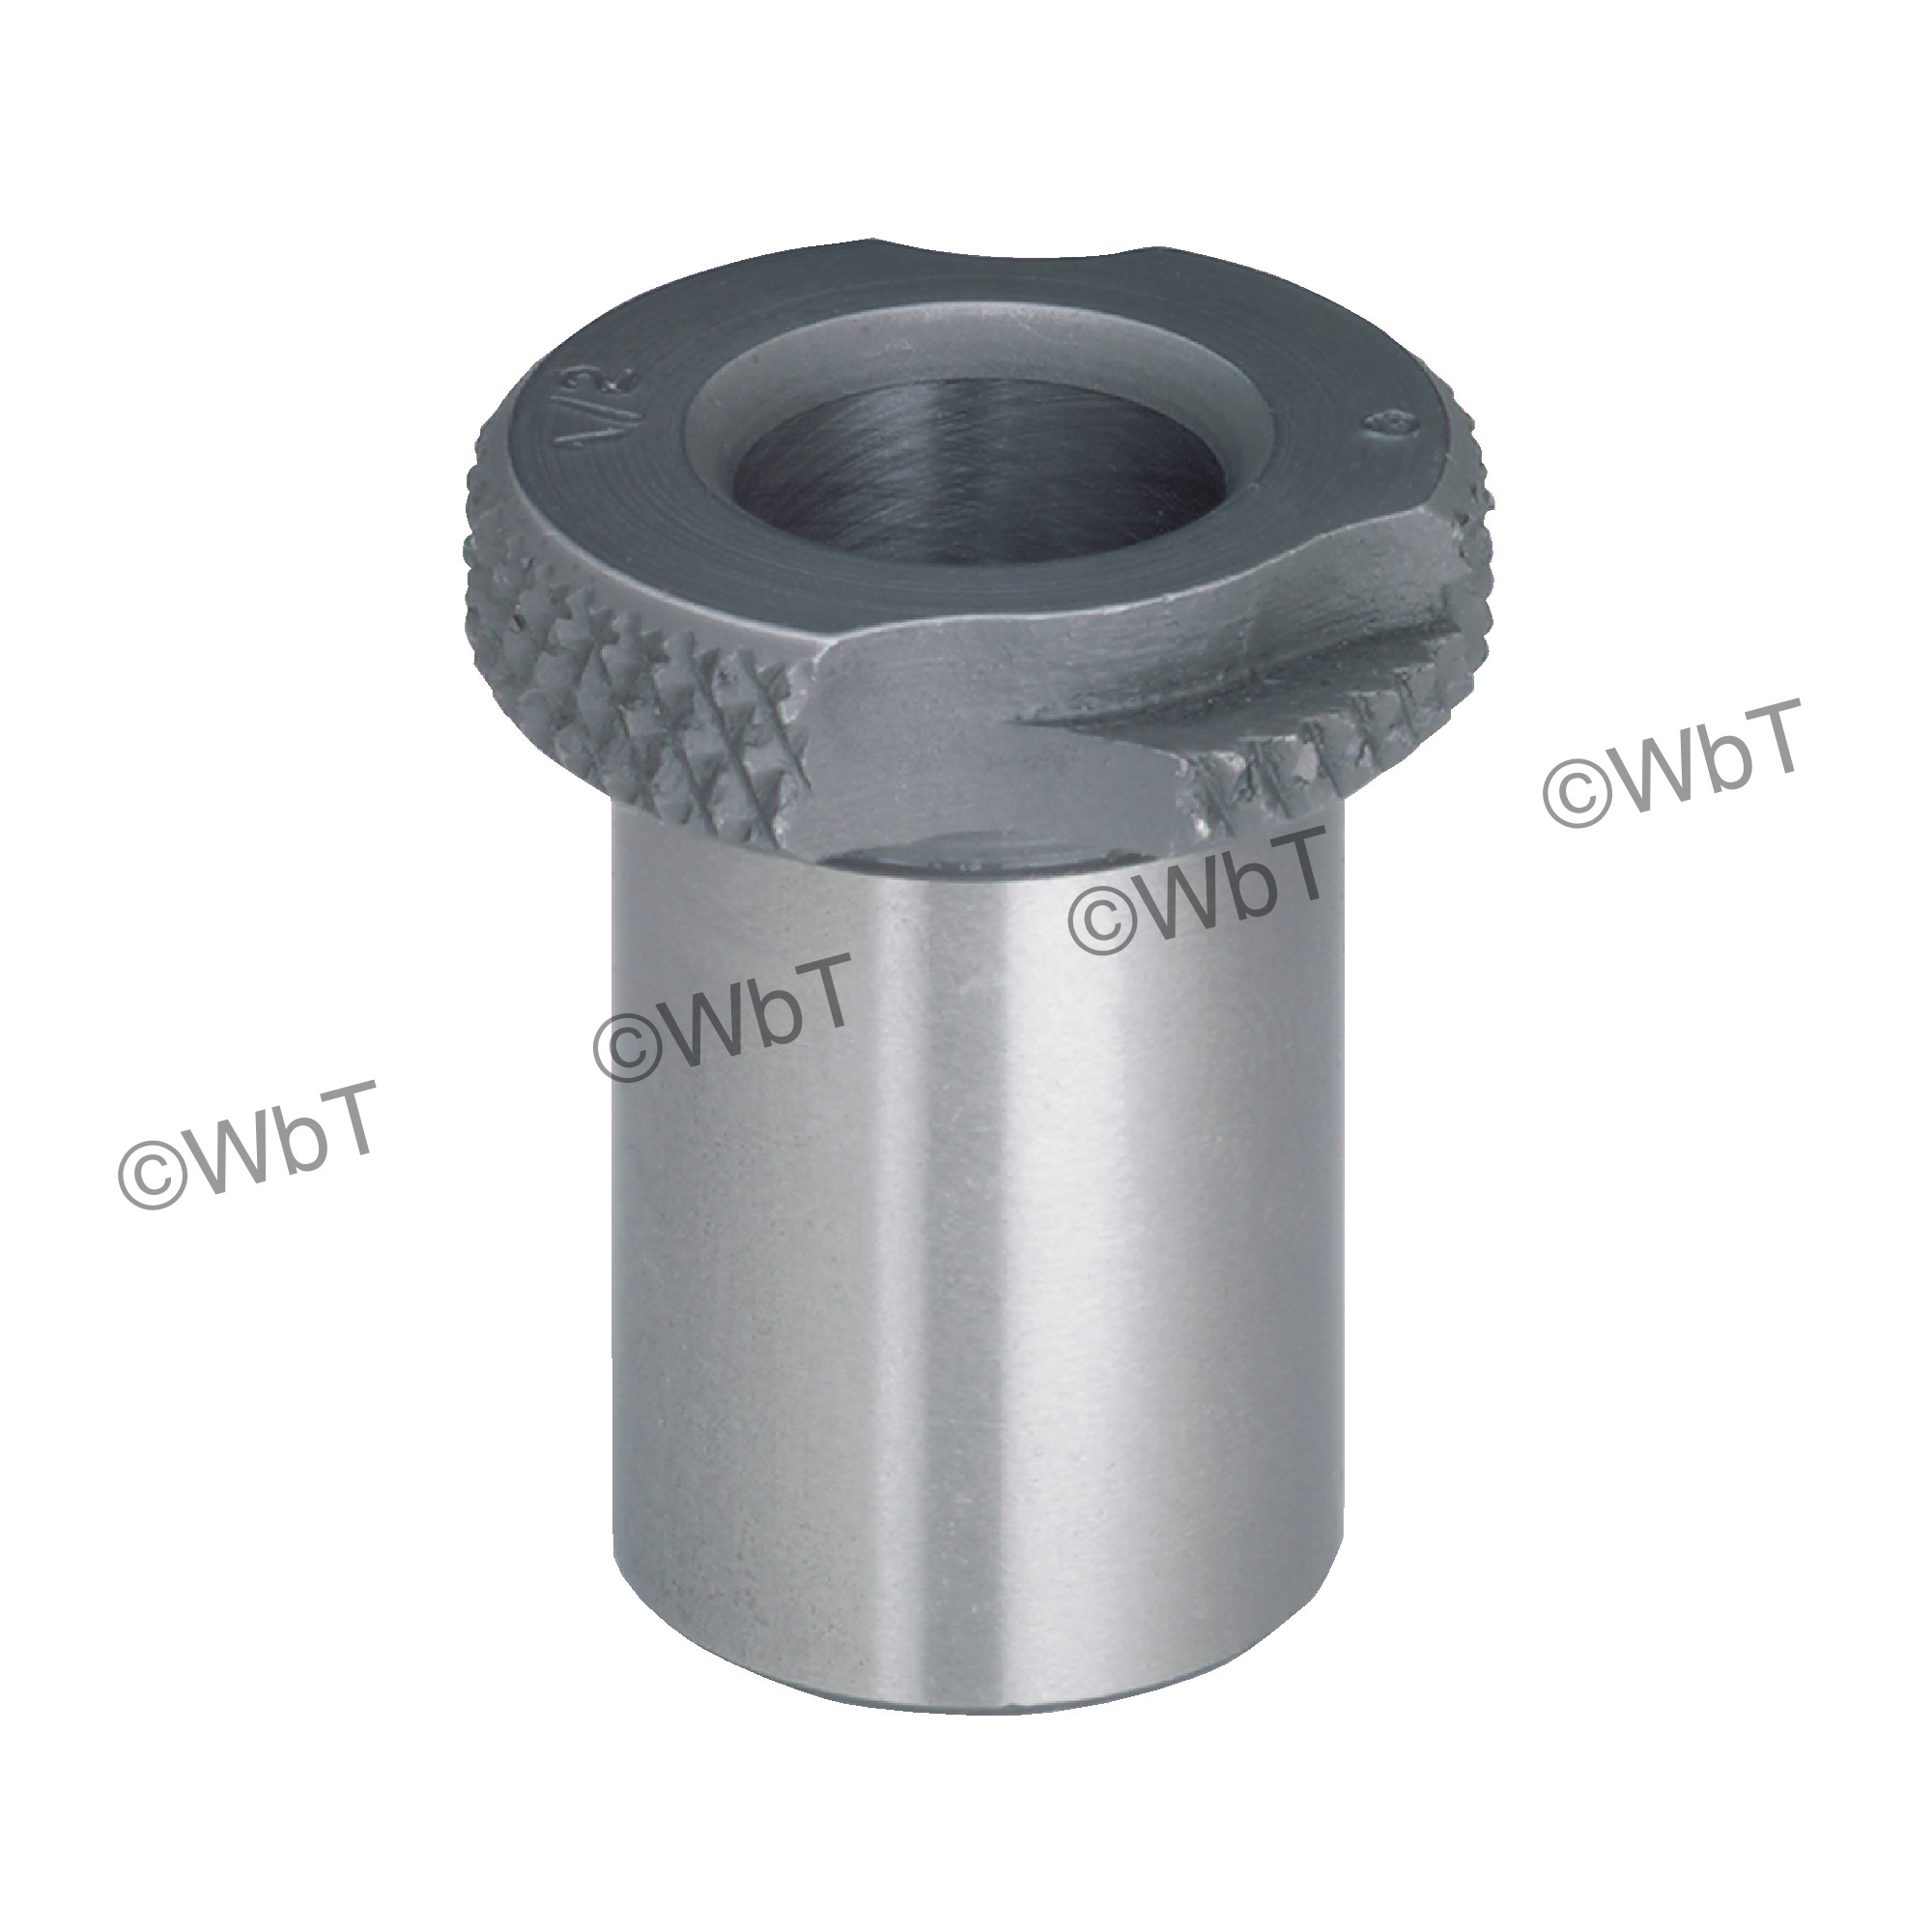 24 internal thread 2×5C Collet Stop Fits any 5C ID threaded collet with 1-3/64" 